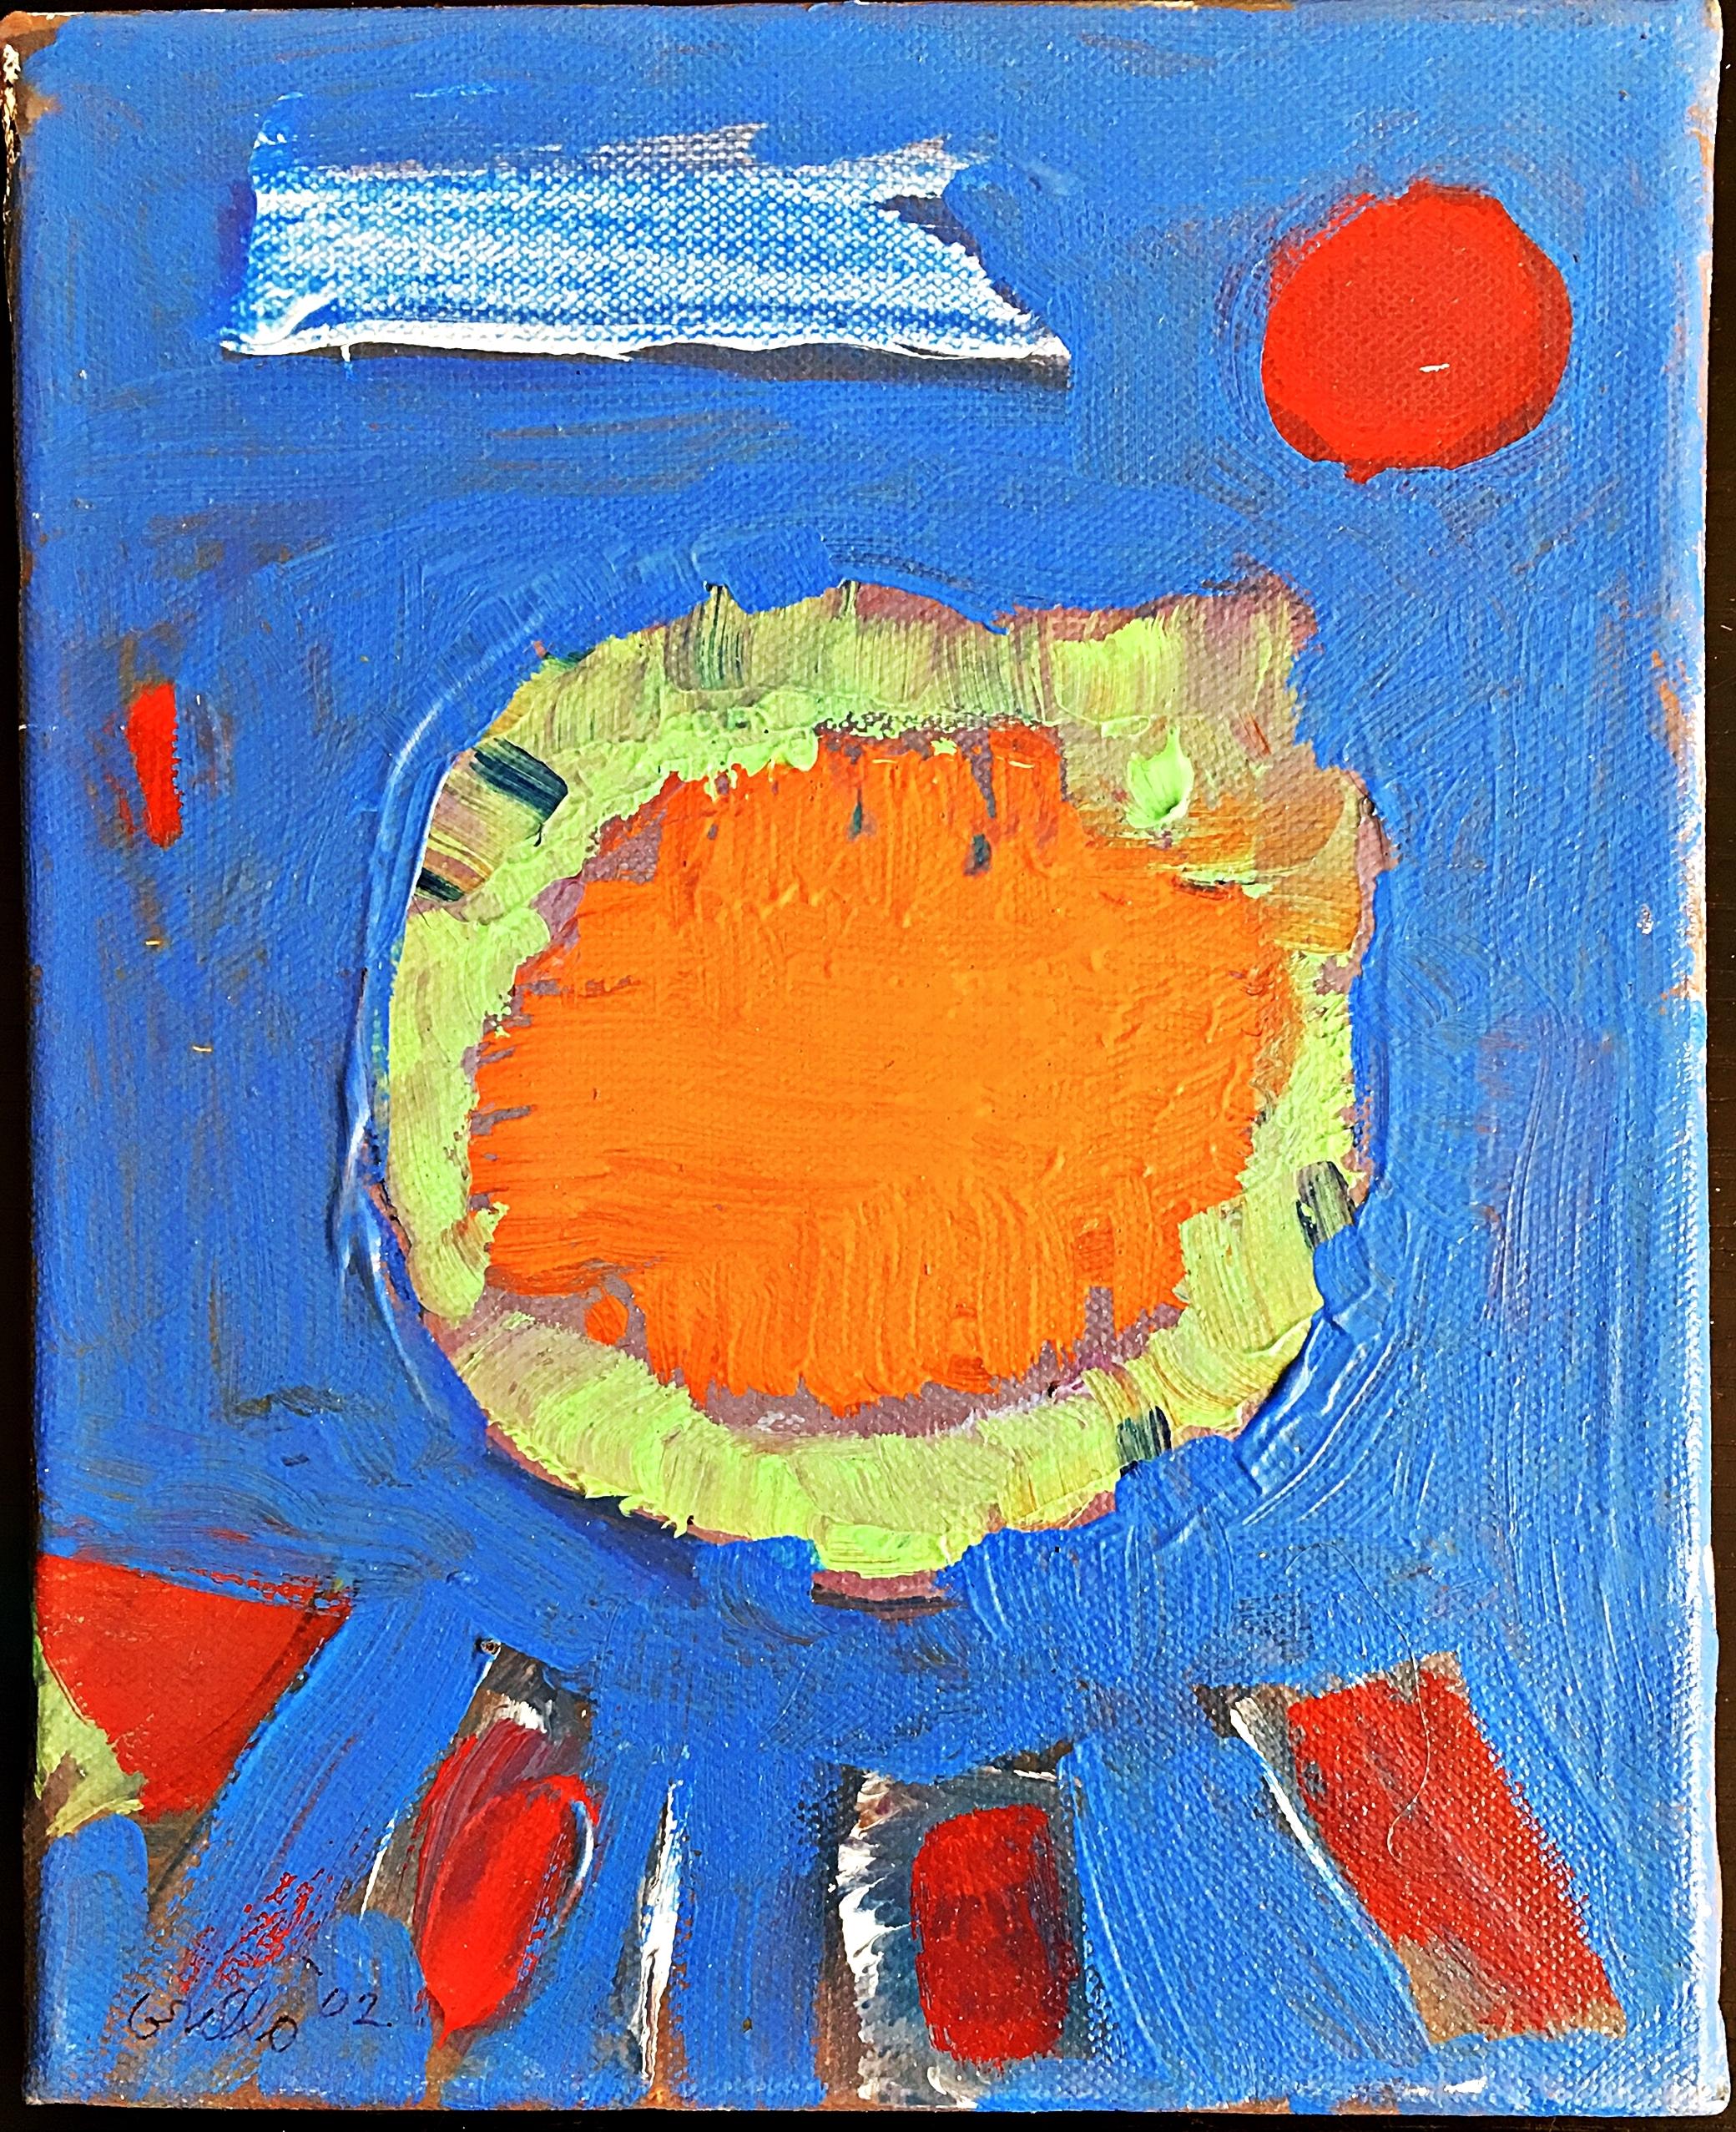 Exquisite Abstract Expressionist Painting by renowned painter, fine provenance